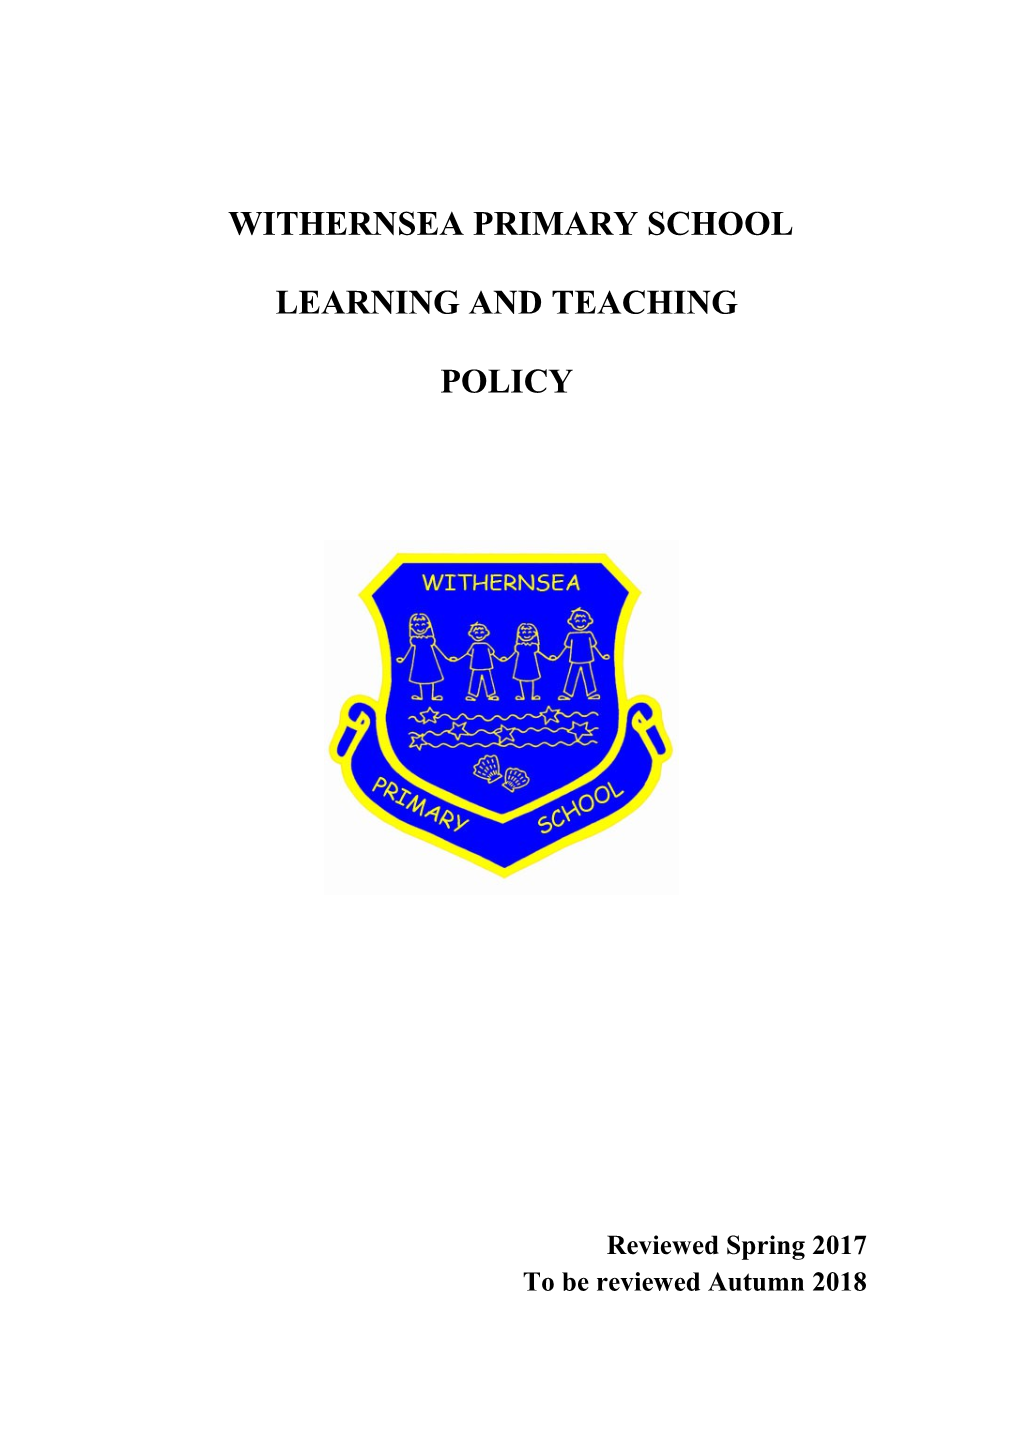 Learning and Teaching Policy Withernsea Primary School